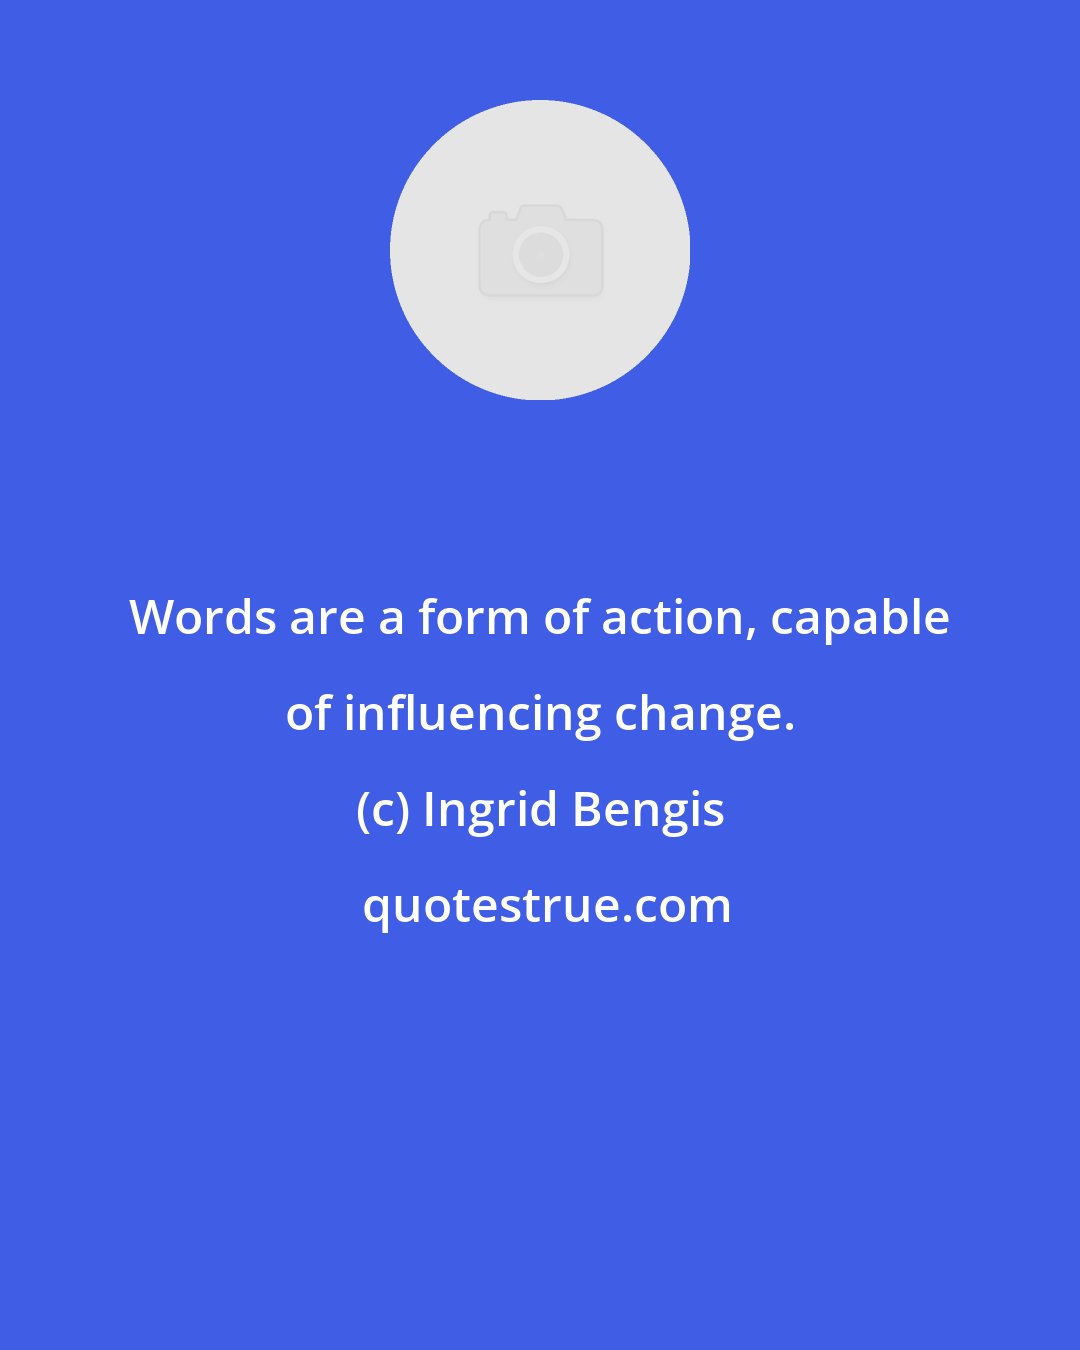 Ingrid Bengis: Words are a form of action, capable of influencing change.